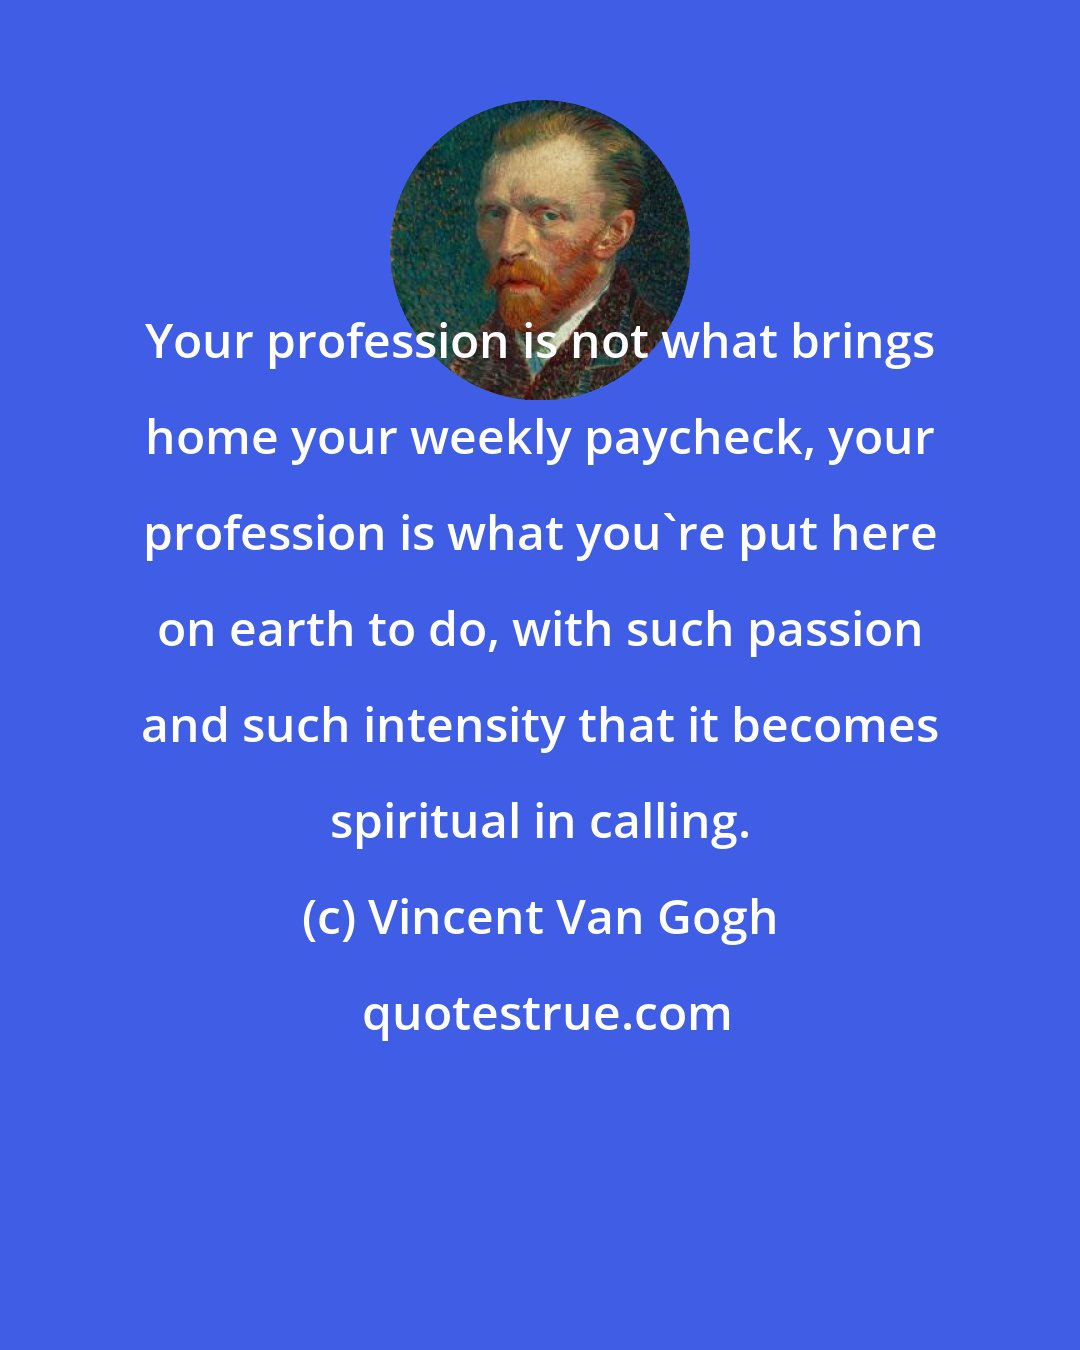 Vincent Van Gogh: Your profession is not what brings home your weekly paycheck, your profession is what you're put here on earth to do, with such passion and such intensity that it becomes spiritual in calling.